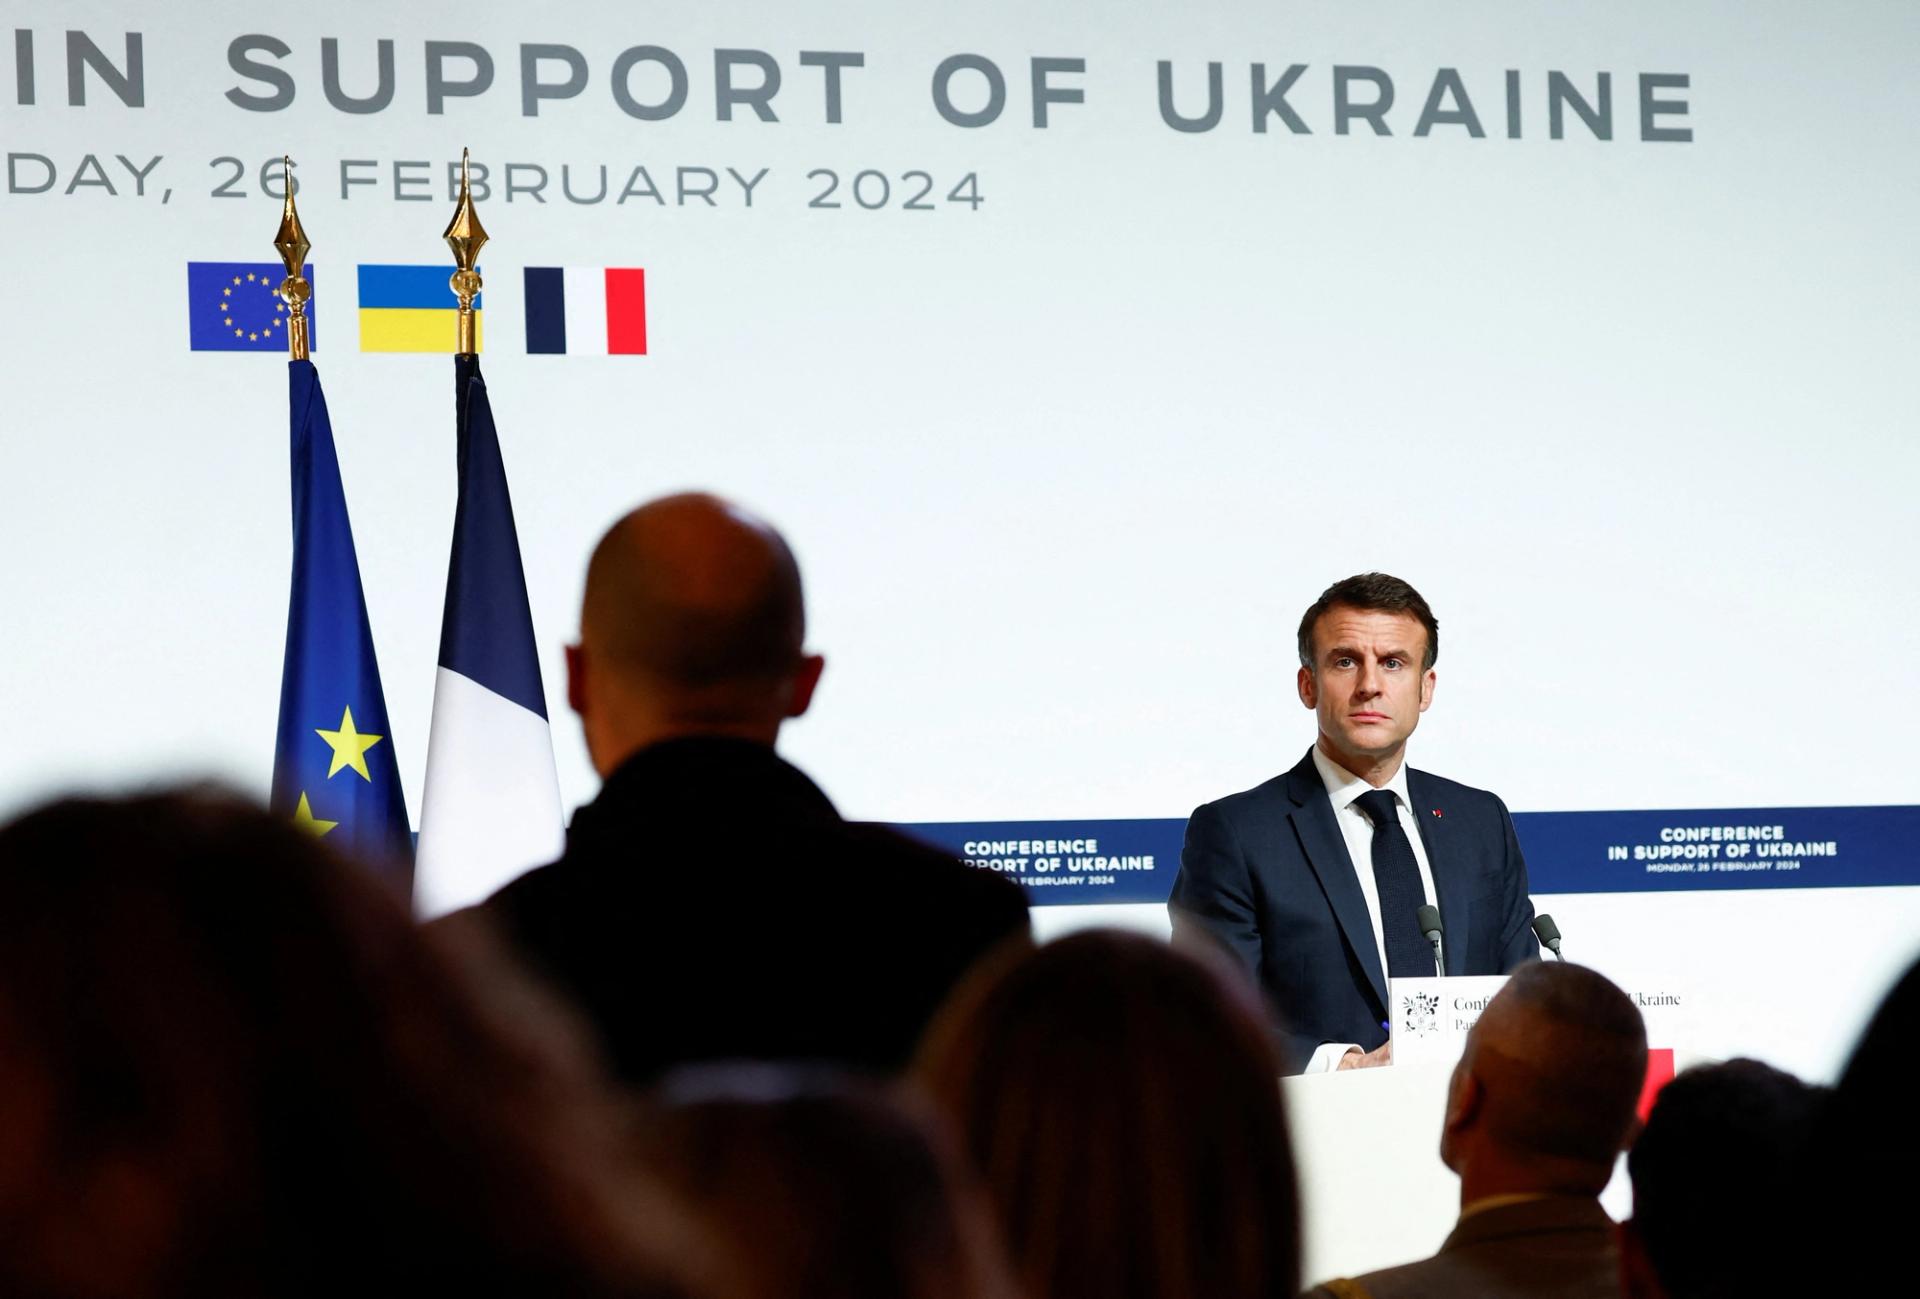 French President Emmanuel Macron speaks during a press conference at the end of the conference in support of Ukraine, with European leaders and government representatives, at the Elysee Palace in Paris, France, February 26, 2024. REUTERS/Gonzalo Fuentes/Pool